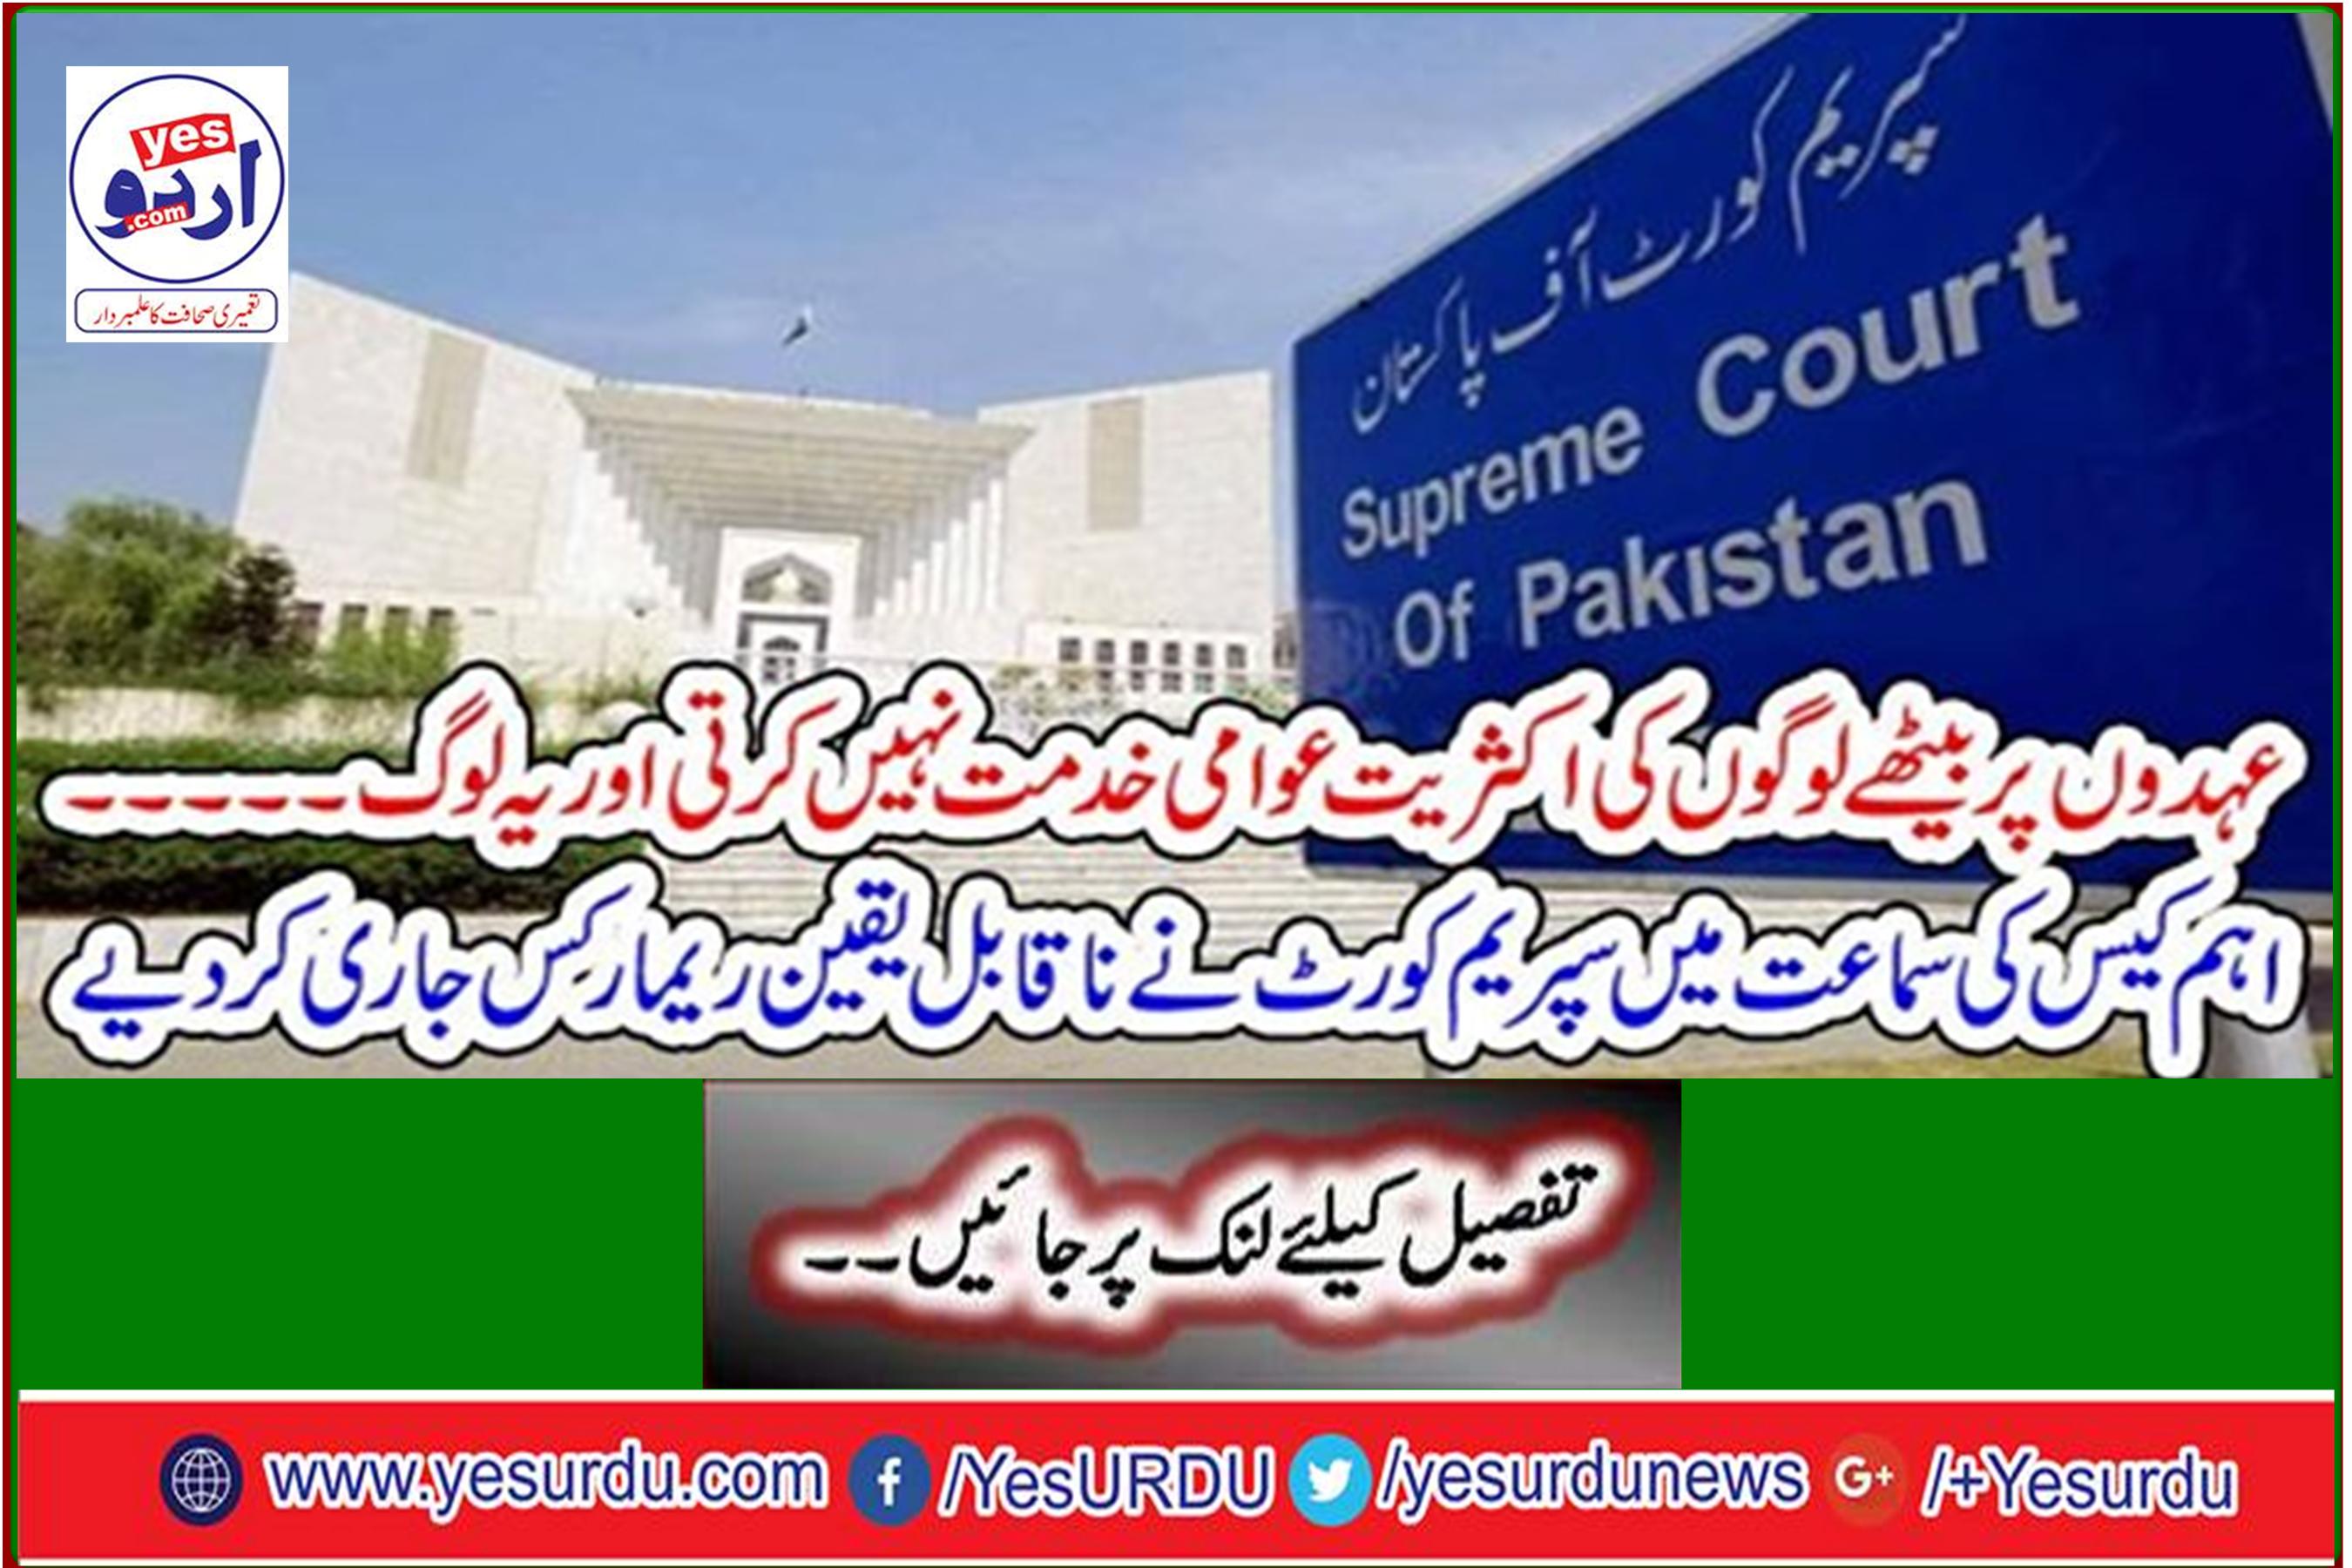 The majority of people in positions do not do public service and these people ... The Supreme Court issued unbelievable remarks at the hearing of the important case